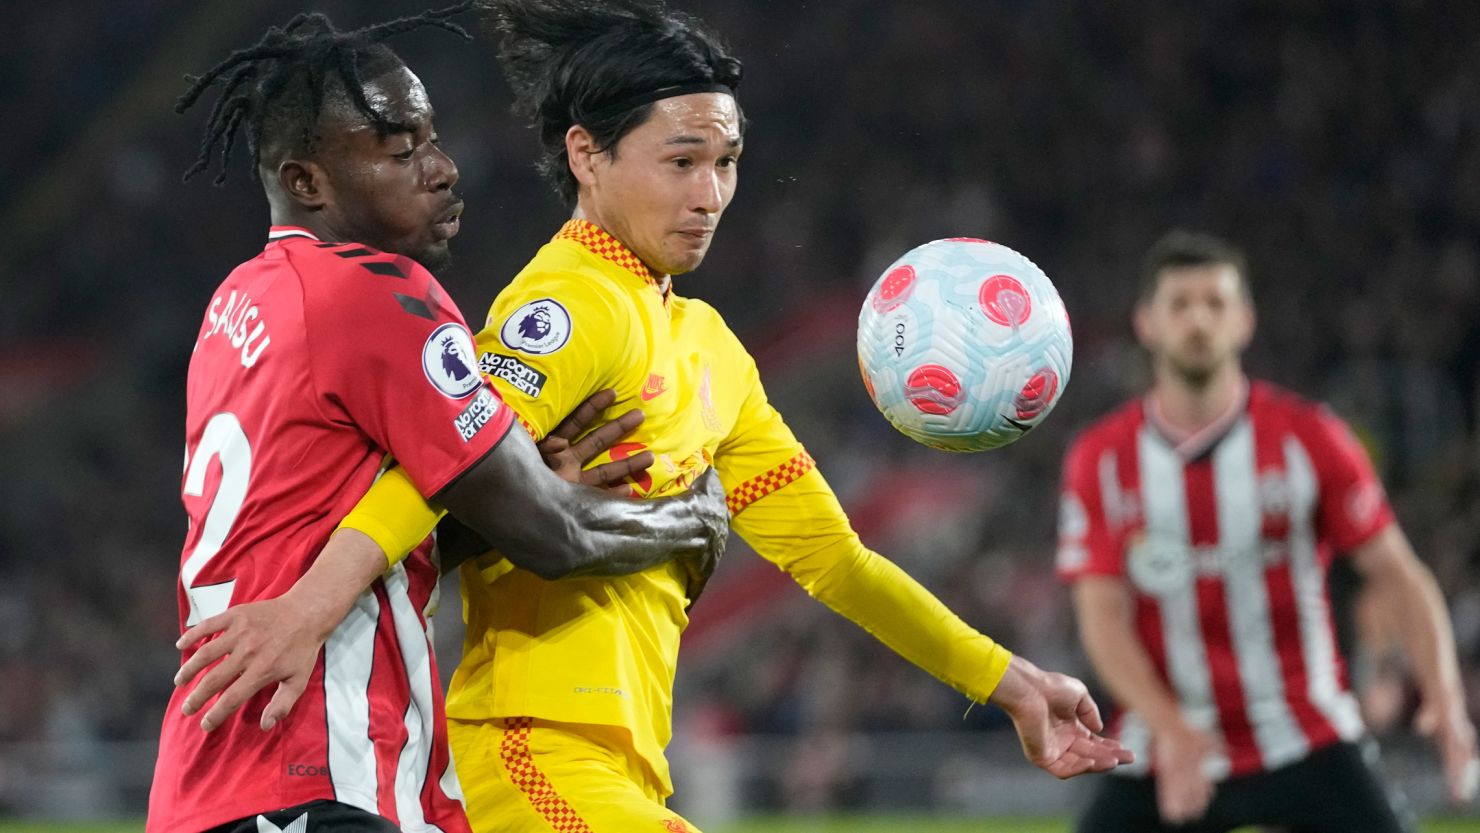 Southampton's Mohammed Salisu, left, challenges for the ball with Liverpool's Takumi Minamino.